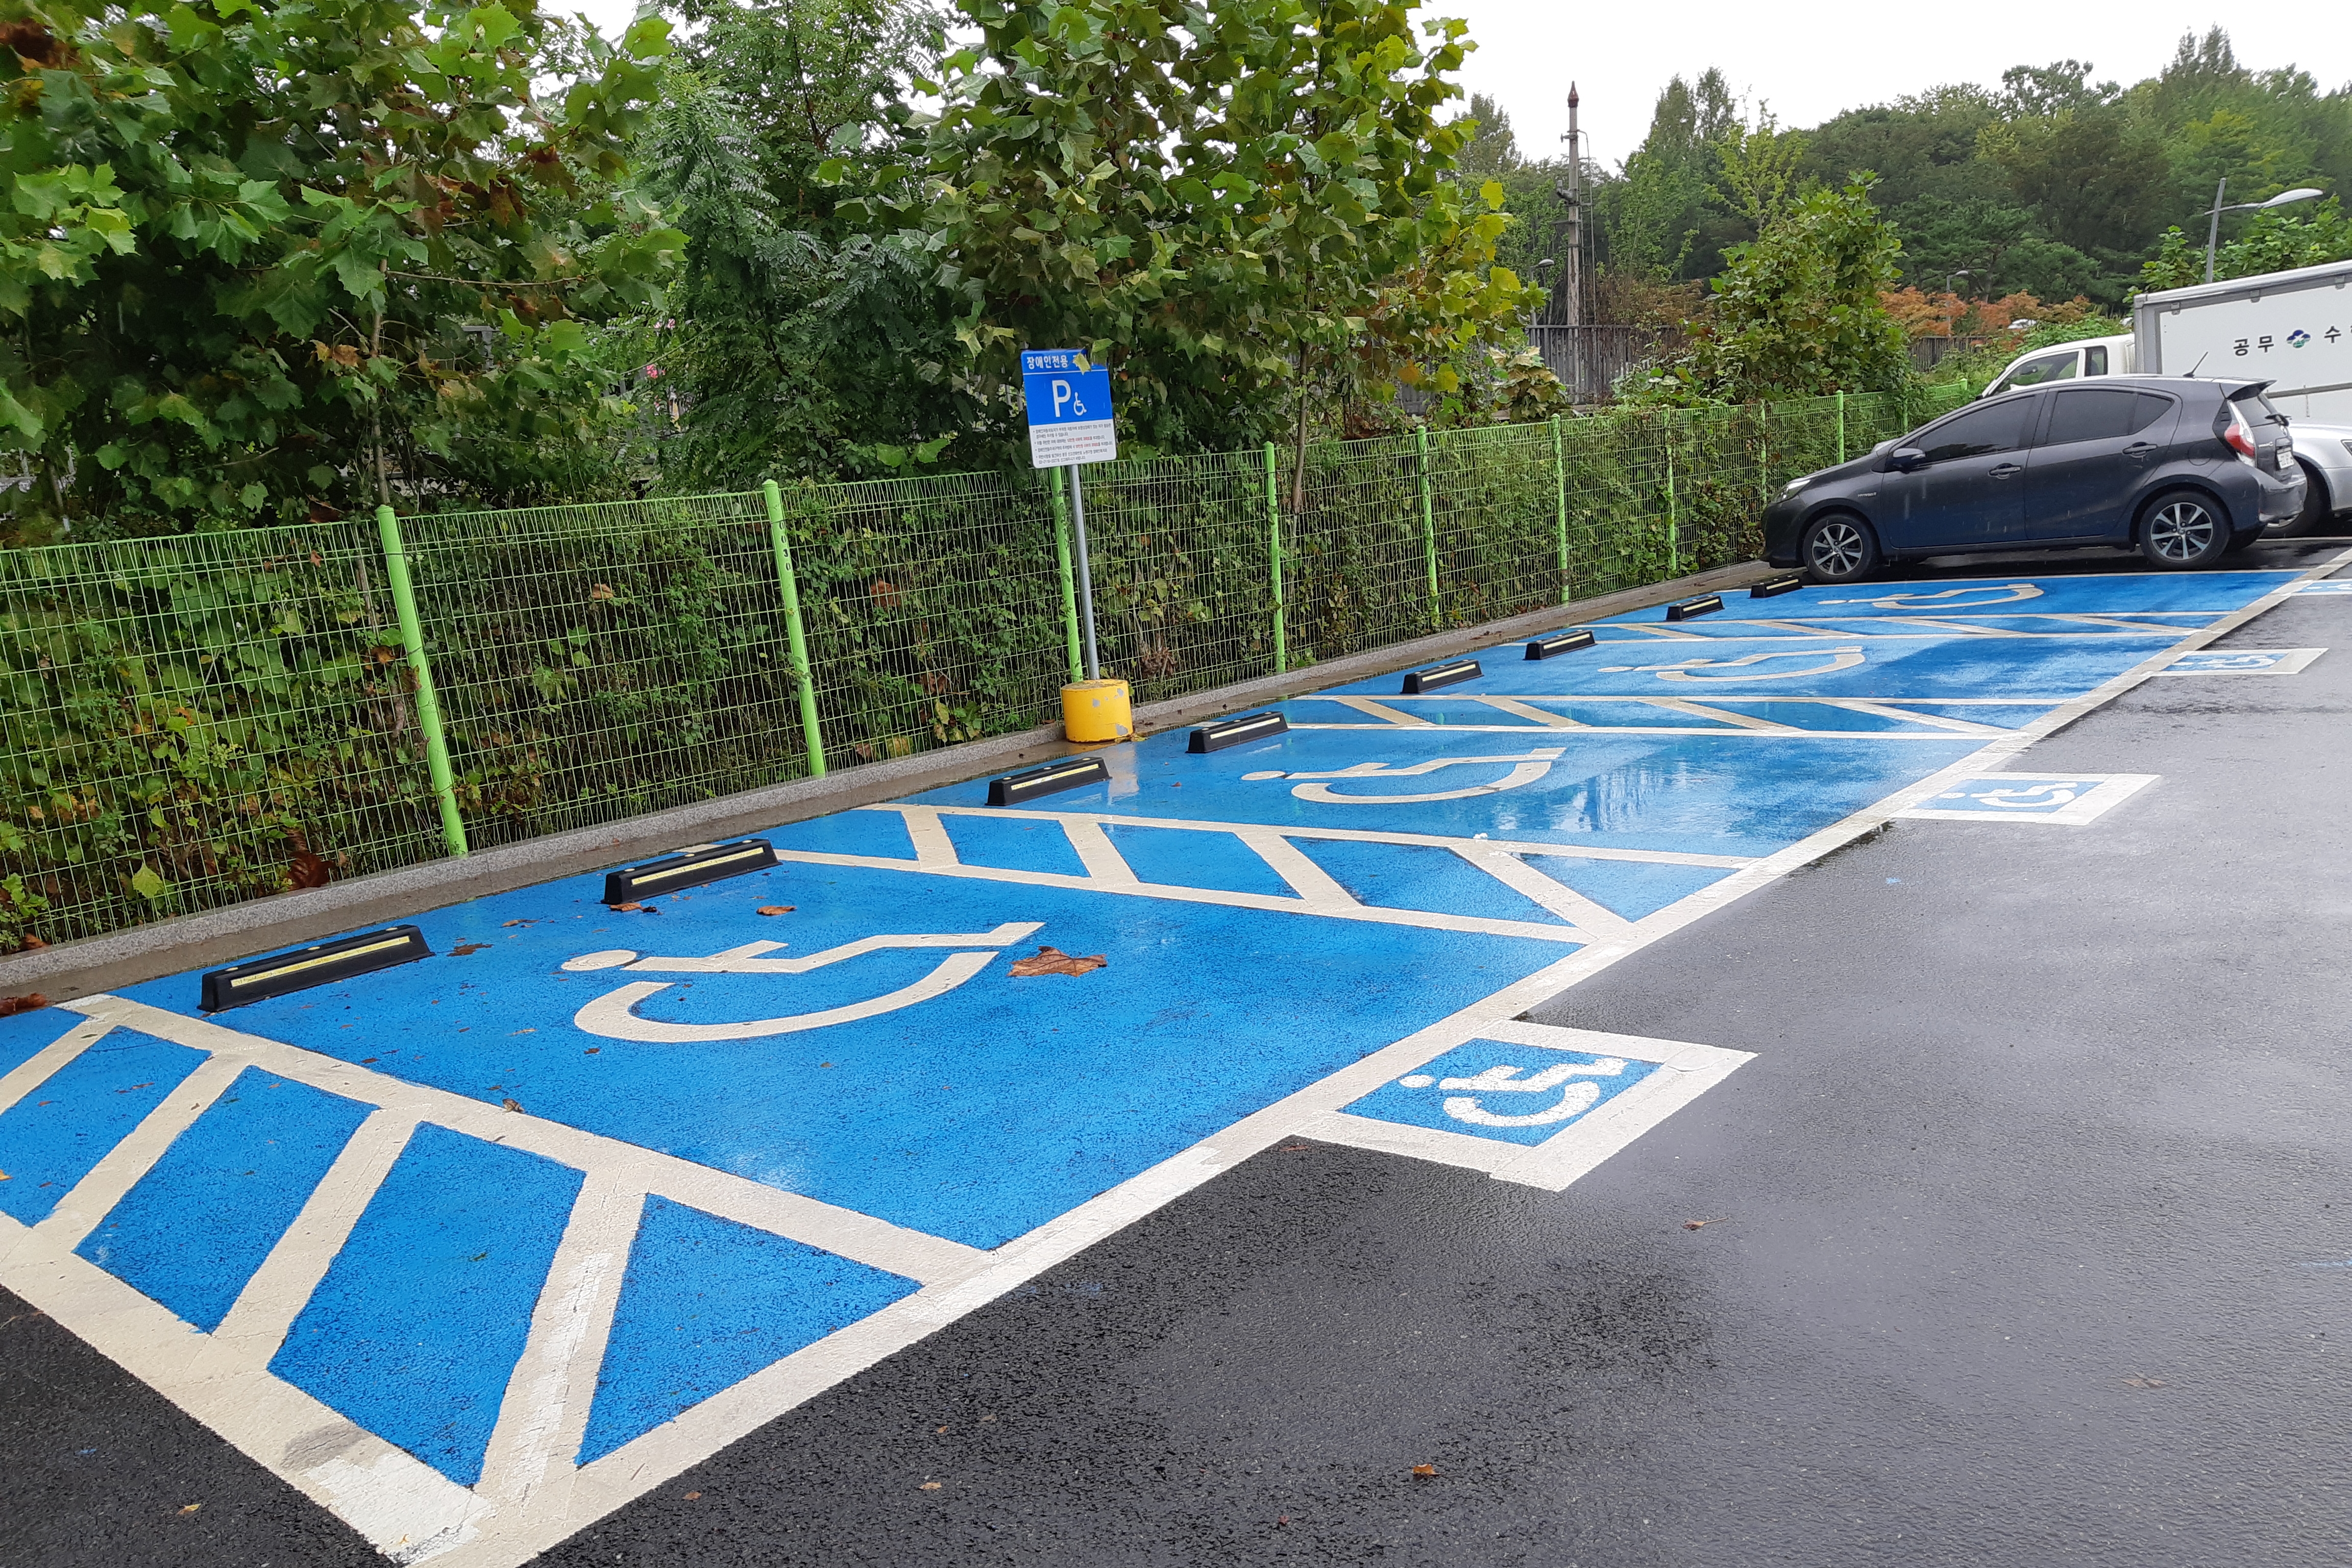 Parking facilities for persons with disabilities0 : The spacious parking facilities for persons with disabilities  in Hwarangdae Railroad Park